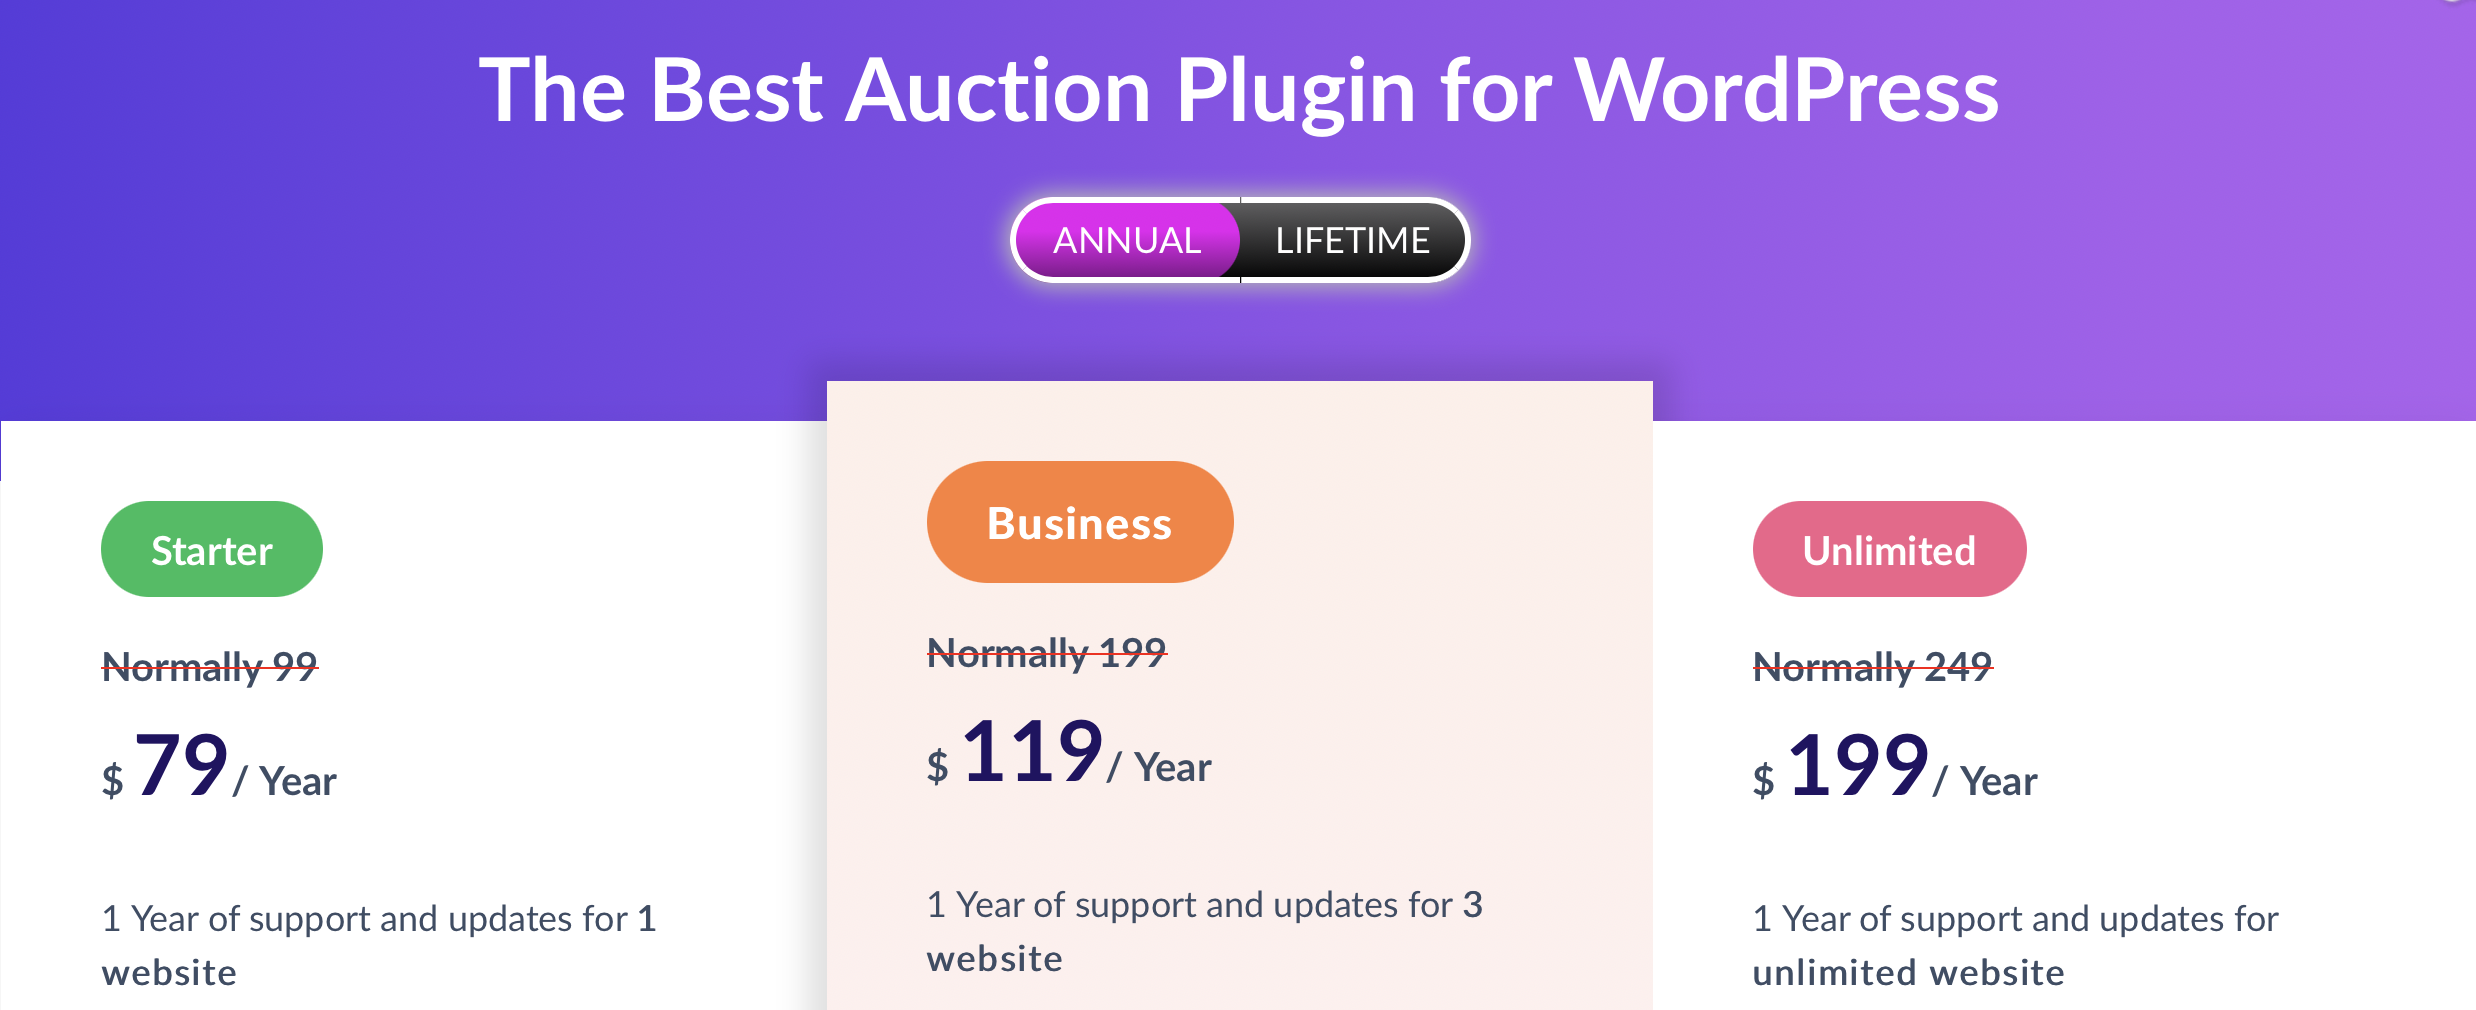 How to let users list auction items.